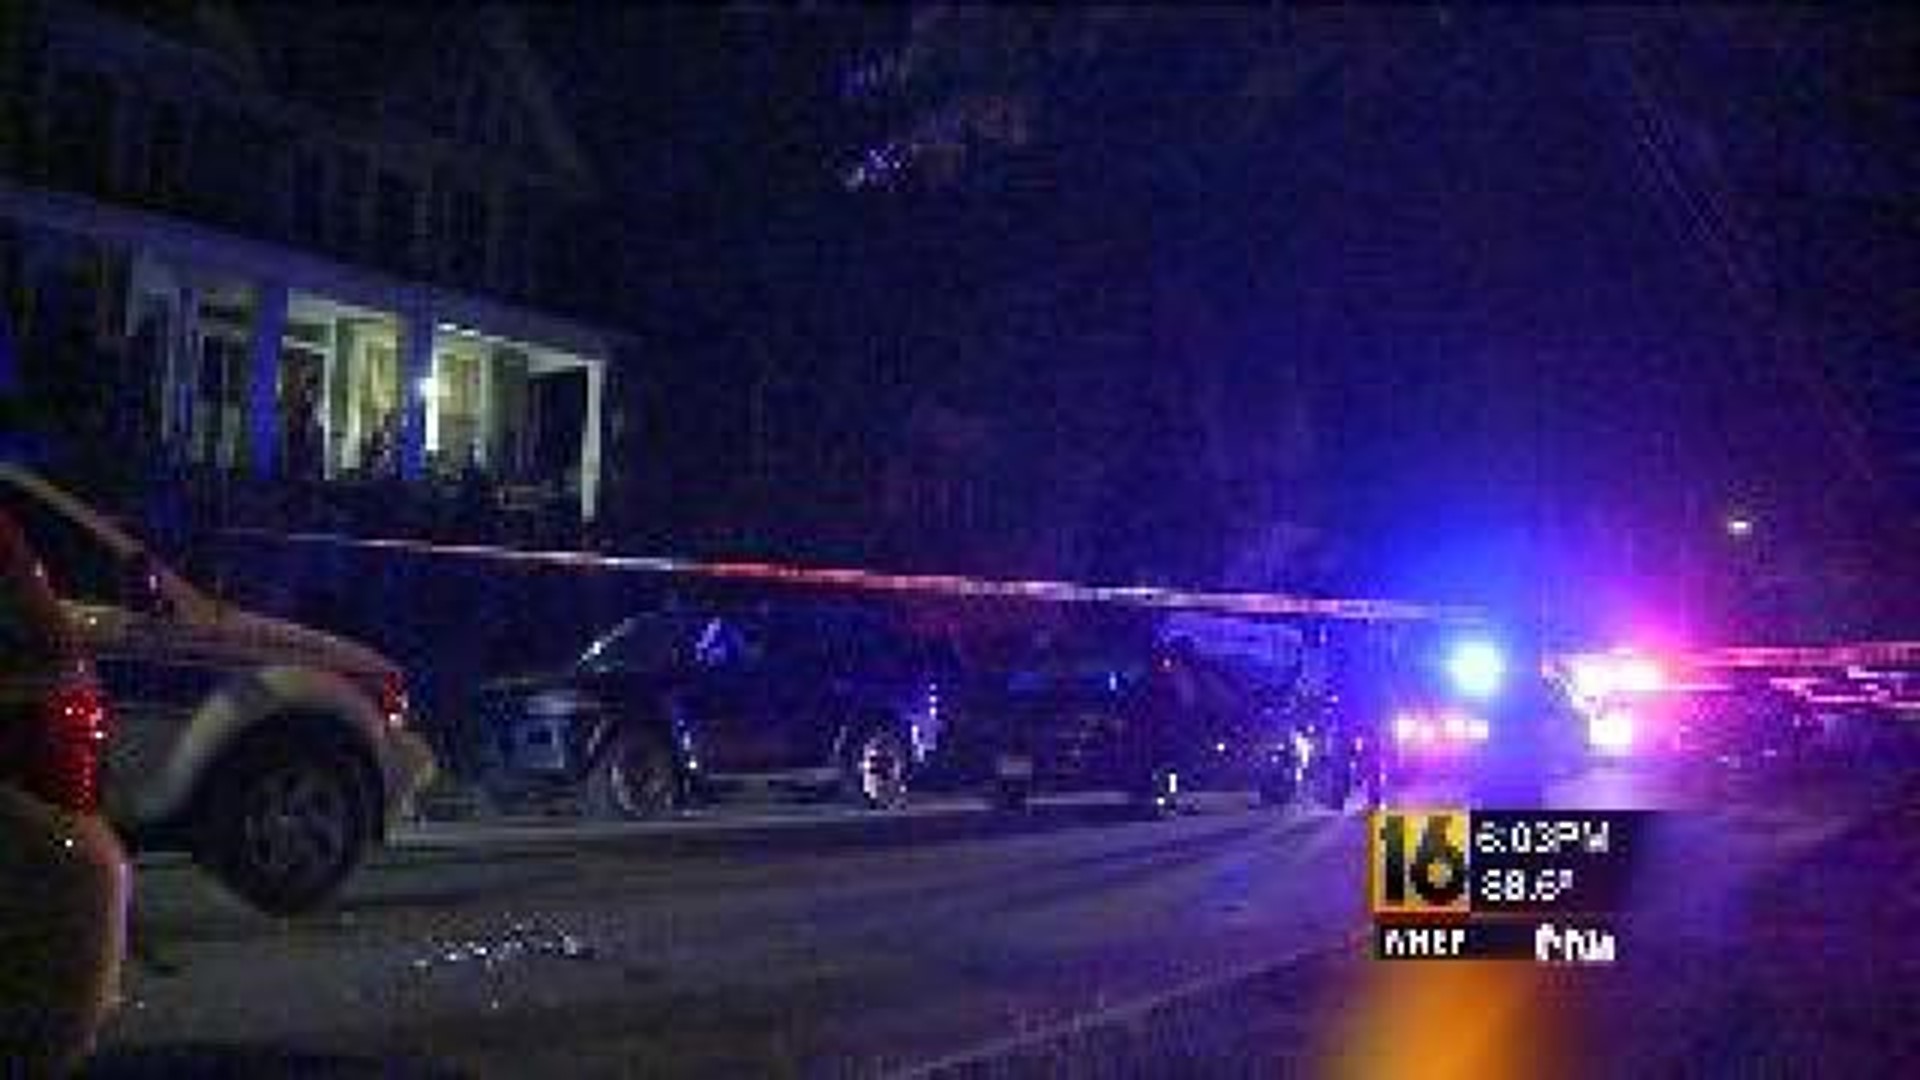 One Man Dead After Shooting in Wilkes-Barre